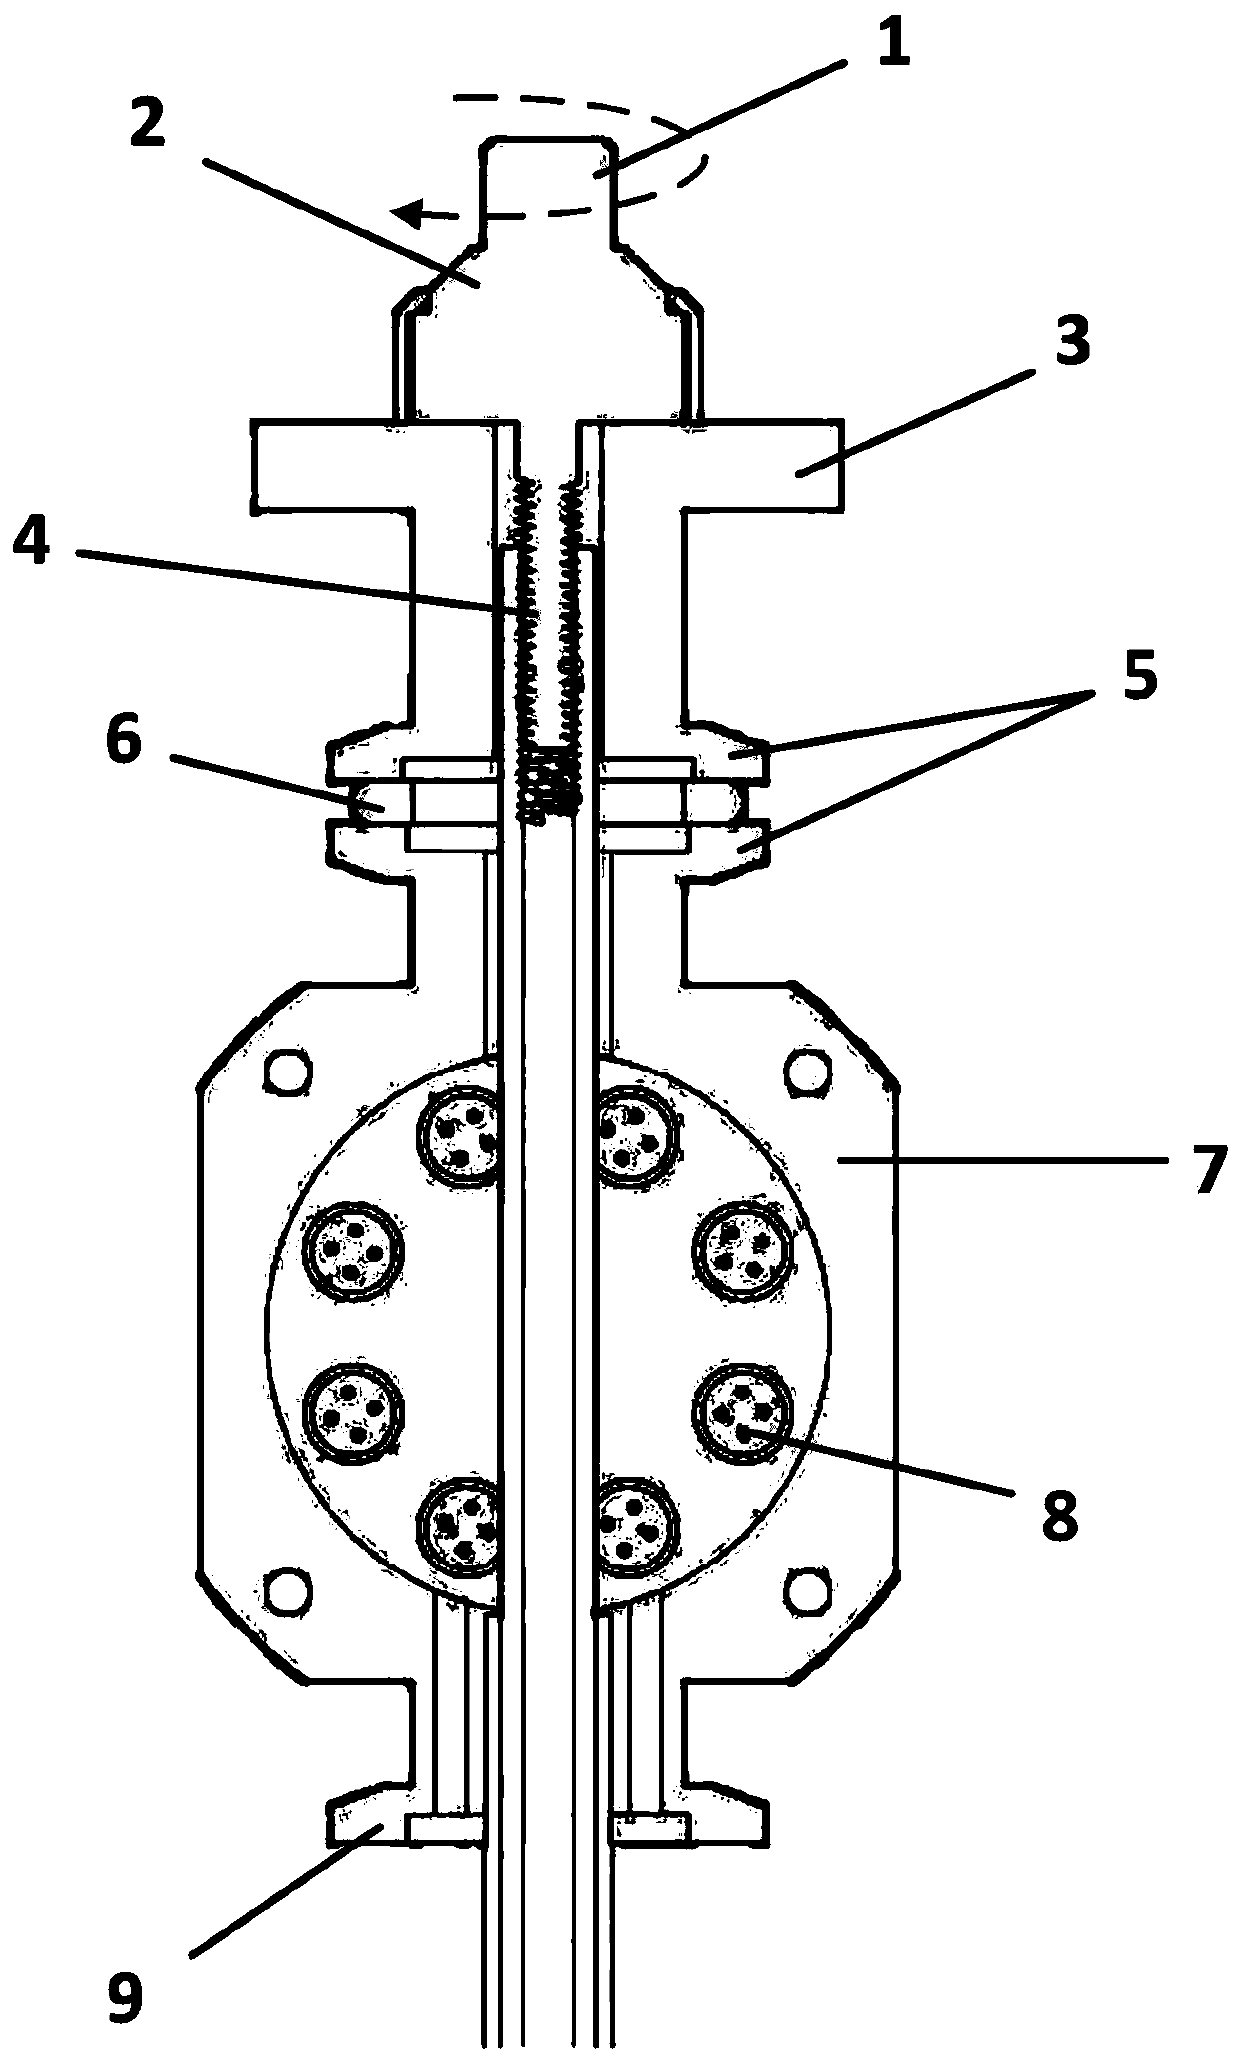 Rotation angle sample rod for electric transport measurement